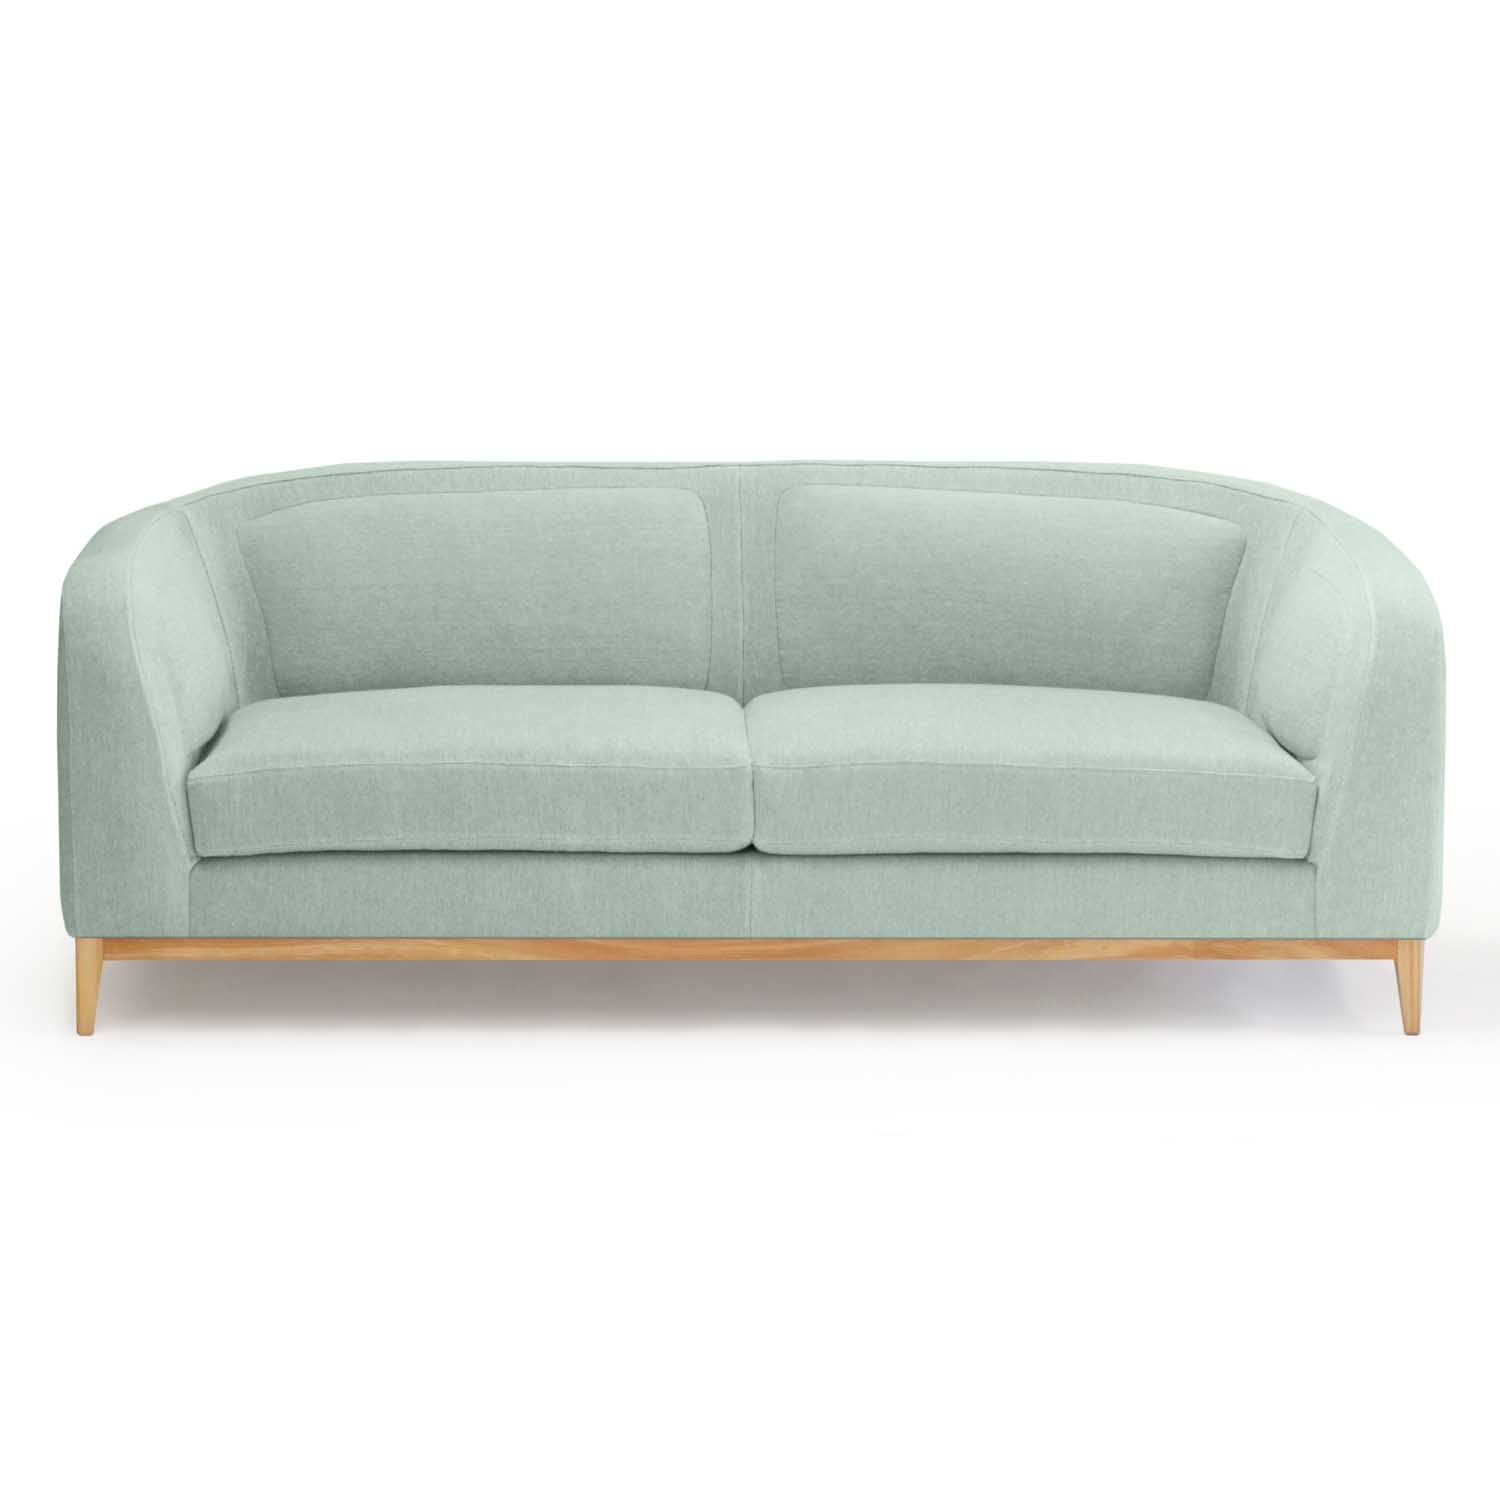 green cotton sofa made in a sustainable way